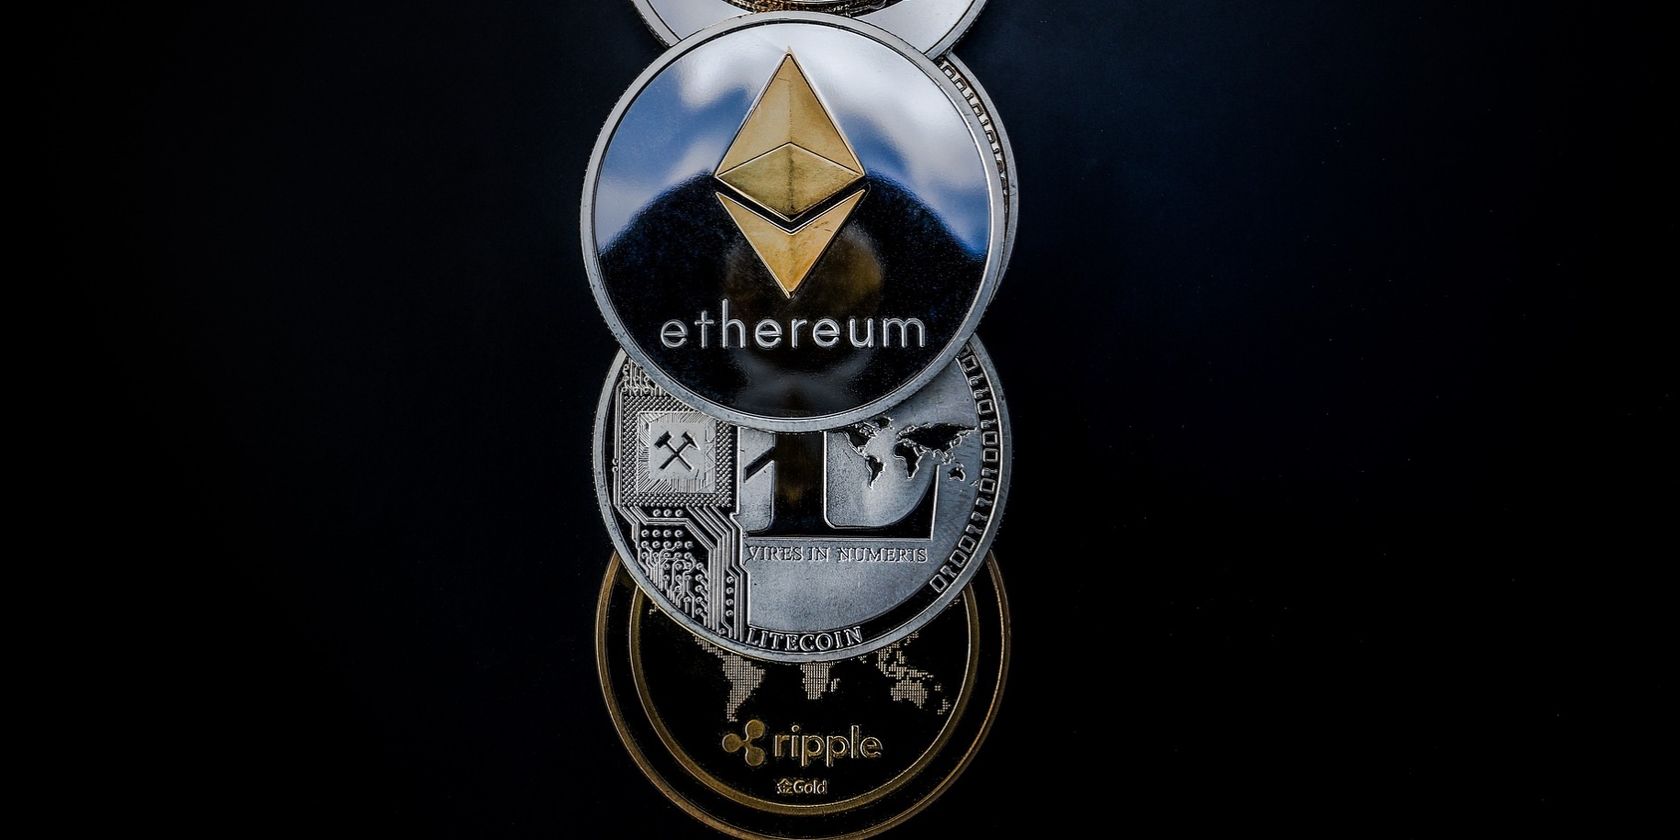 A picture of ethereum, litecoin, and ripple